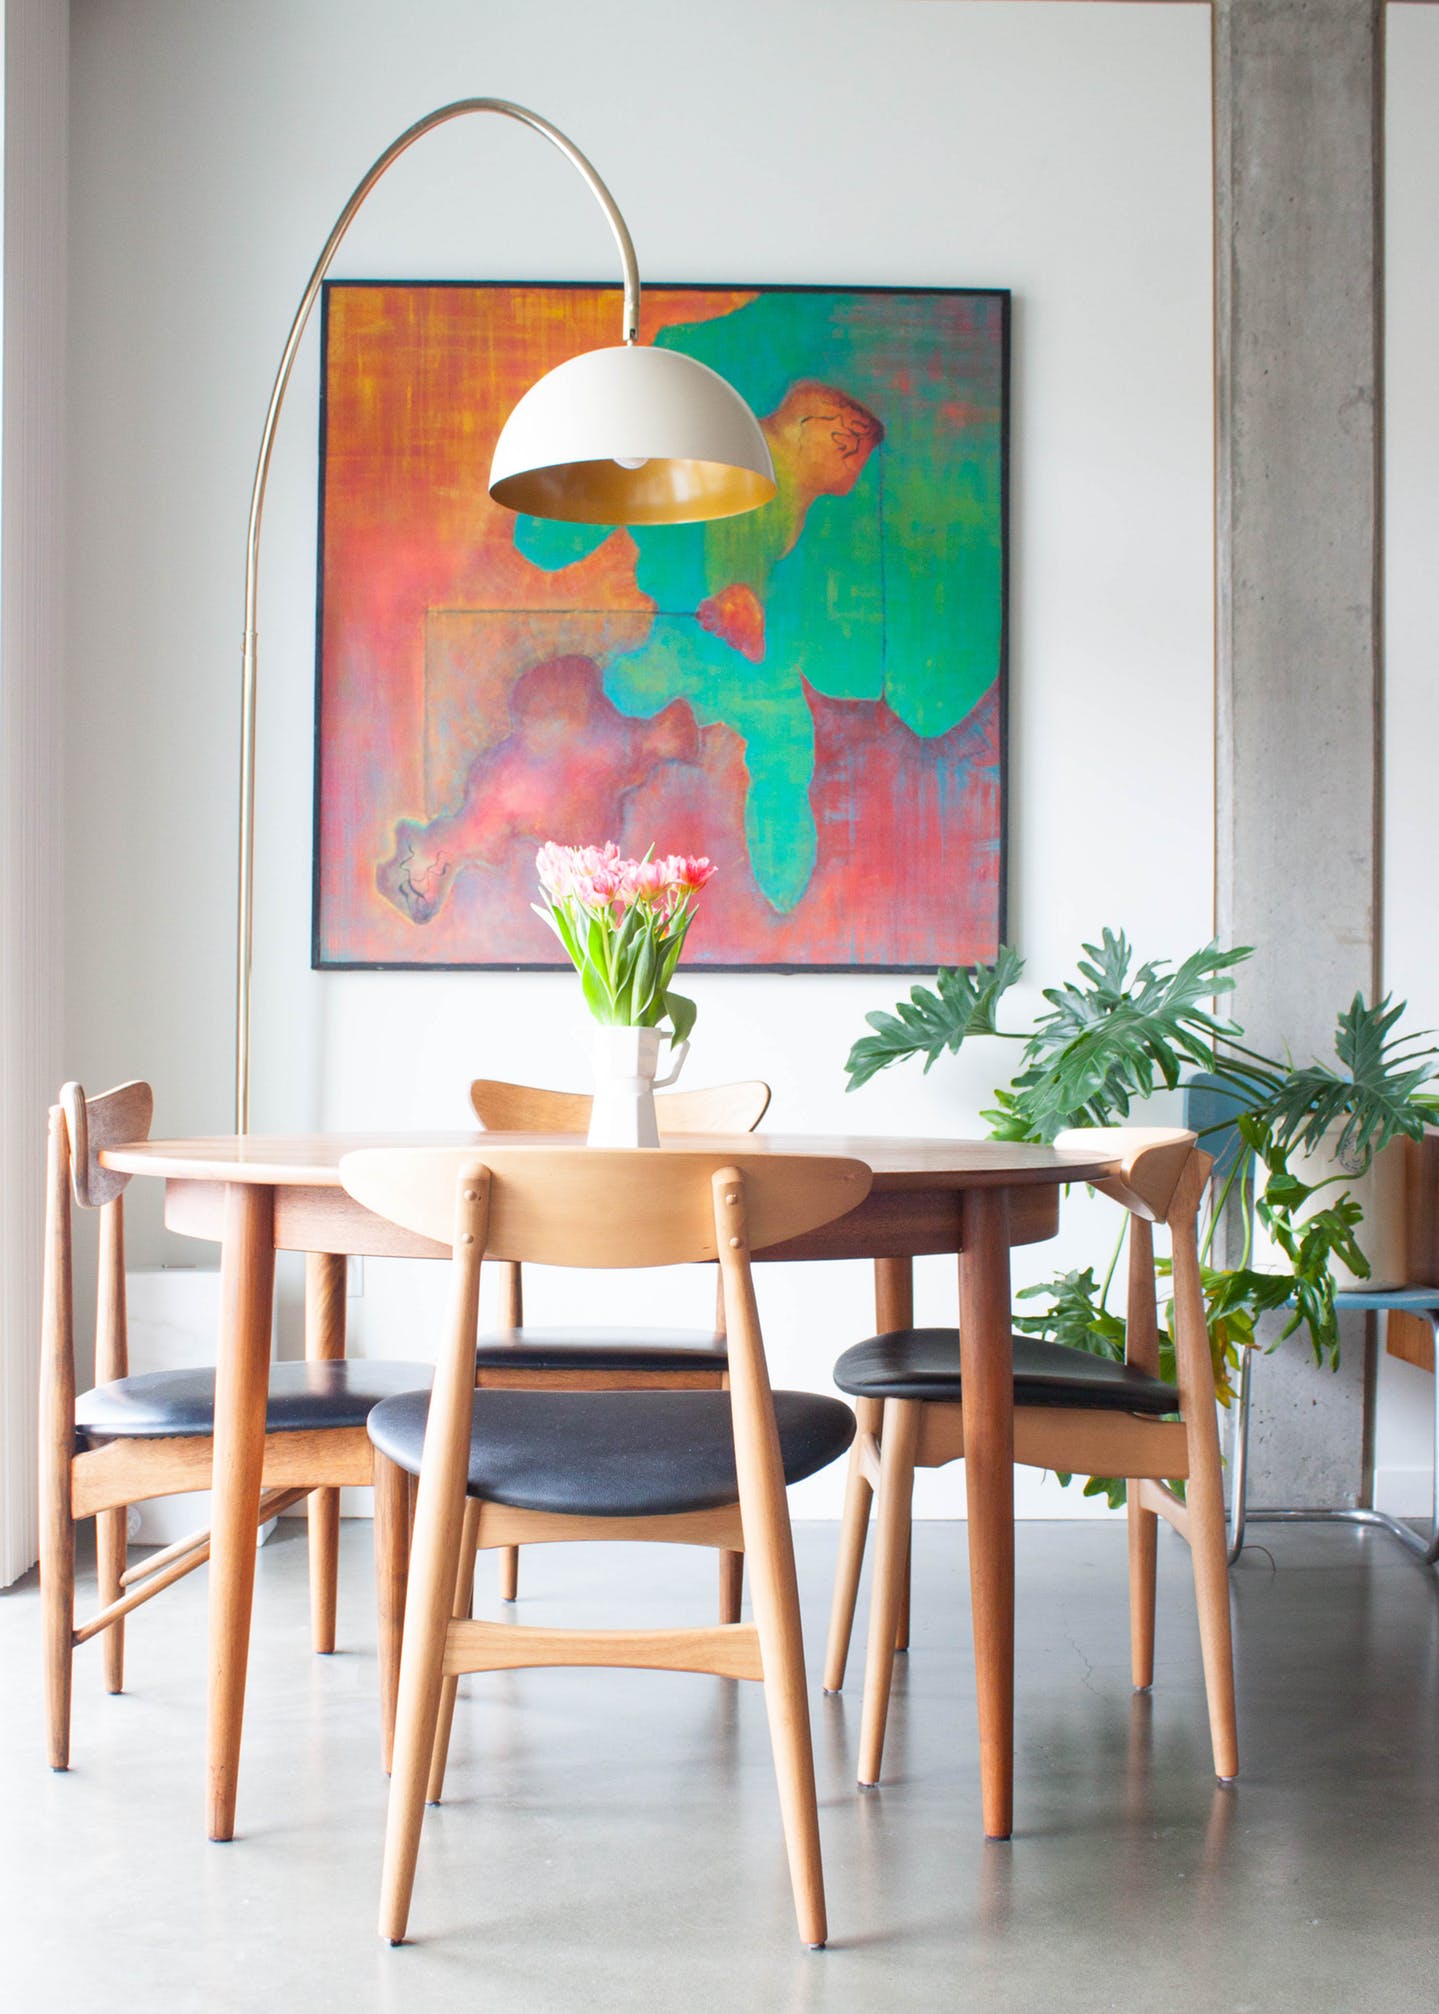 New Year, New Dining Room Get Inspired By These 8 Dining Room Ideas 6